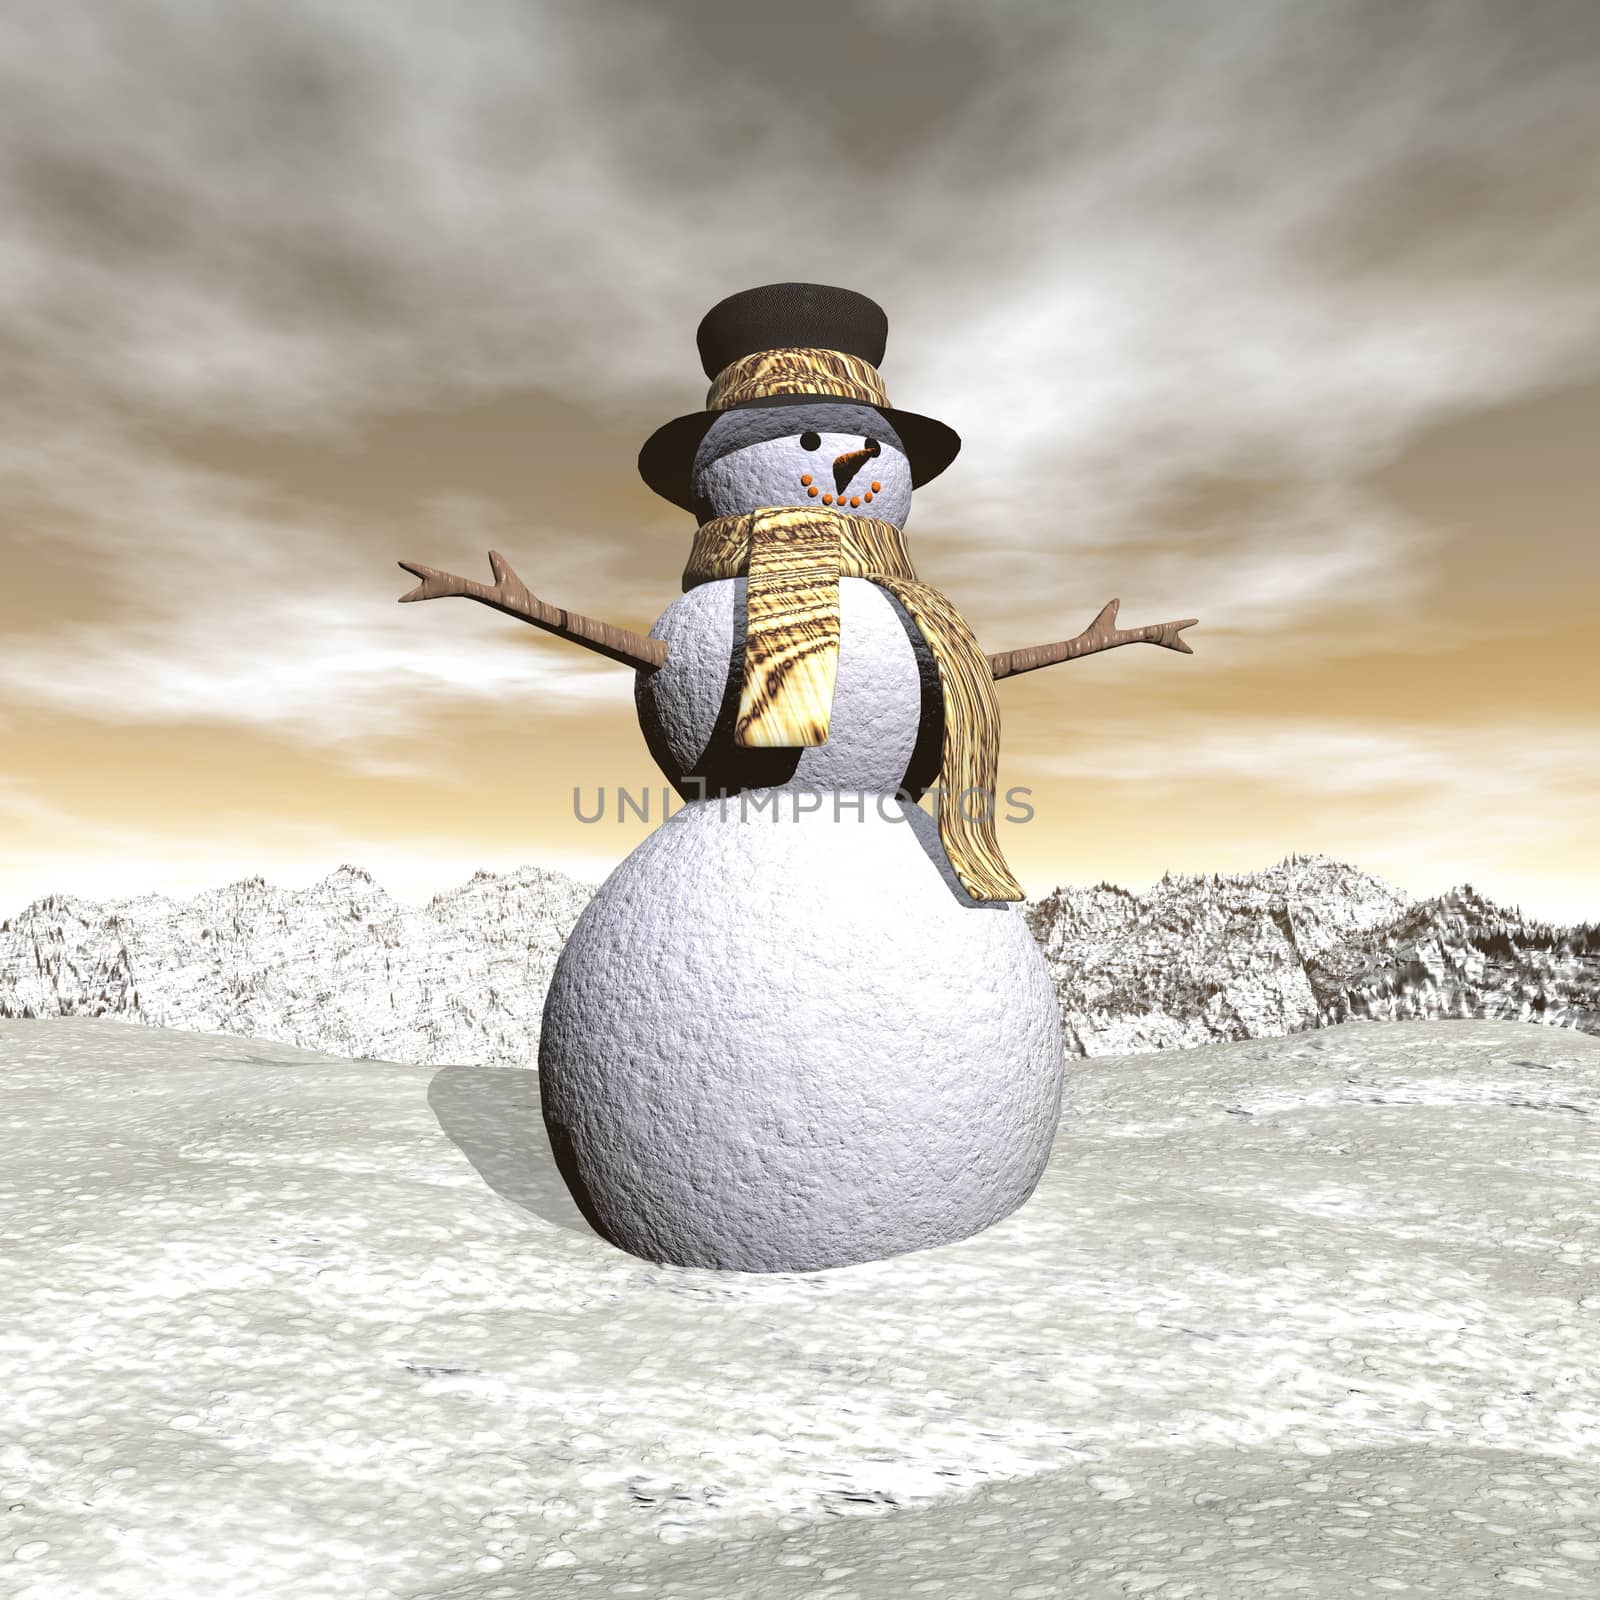 Snowman by snowing evening - 3D render by Elenaphotos21